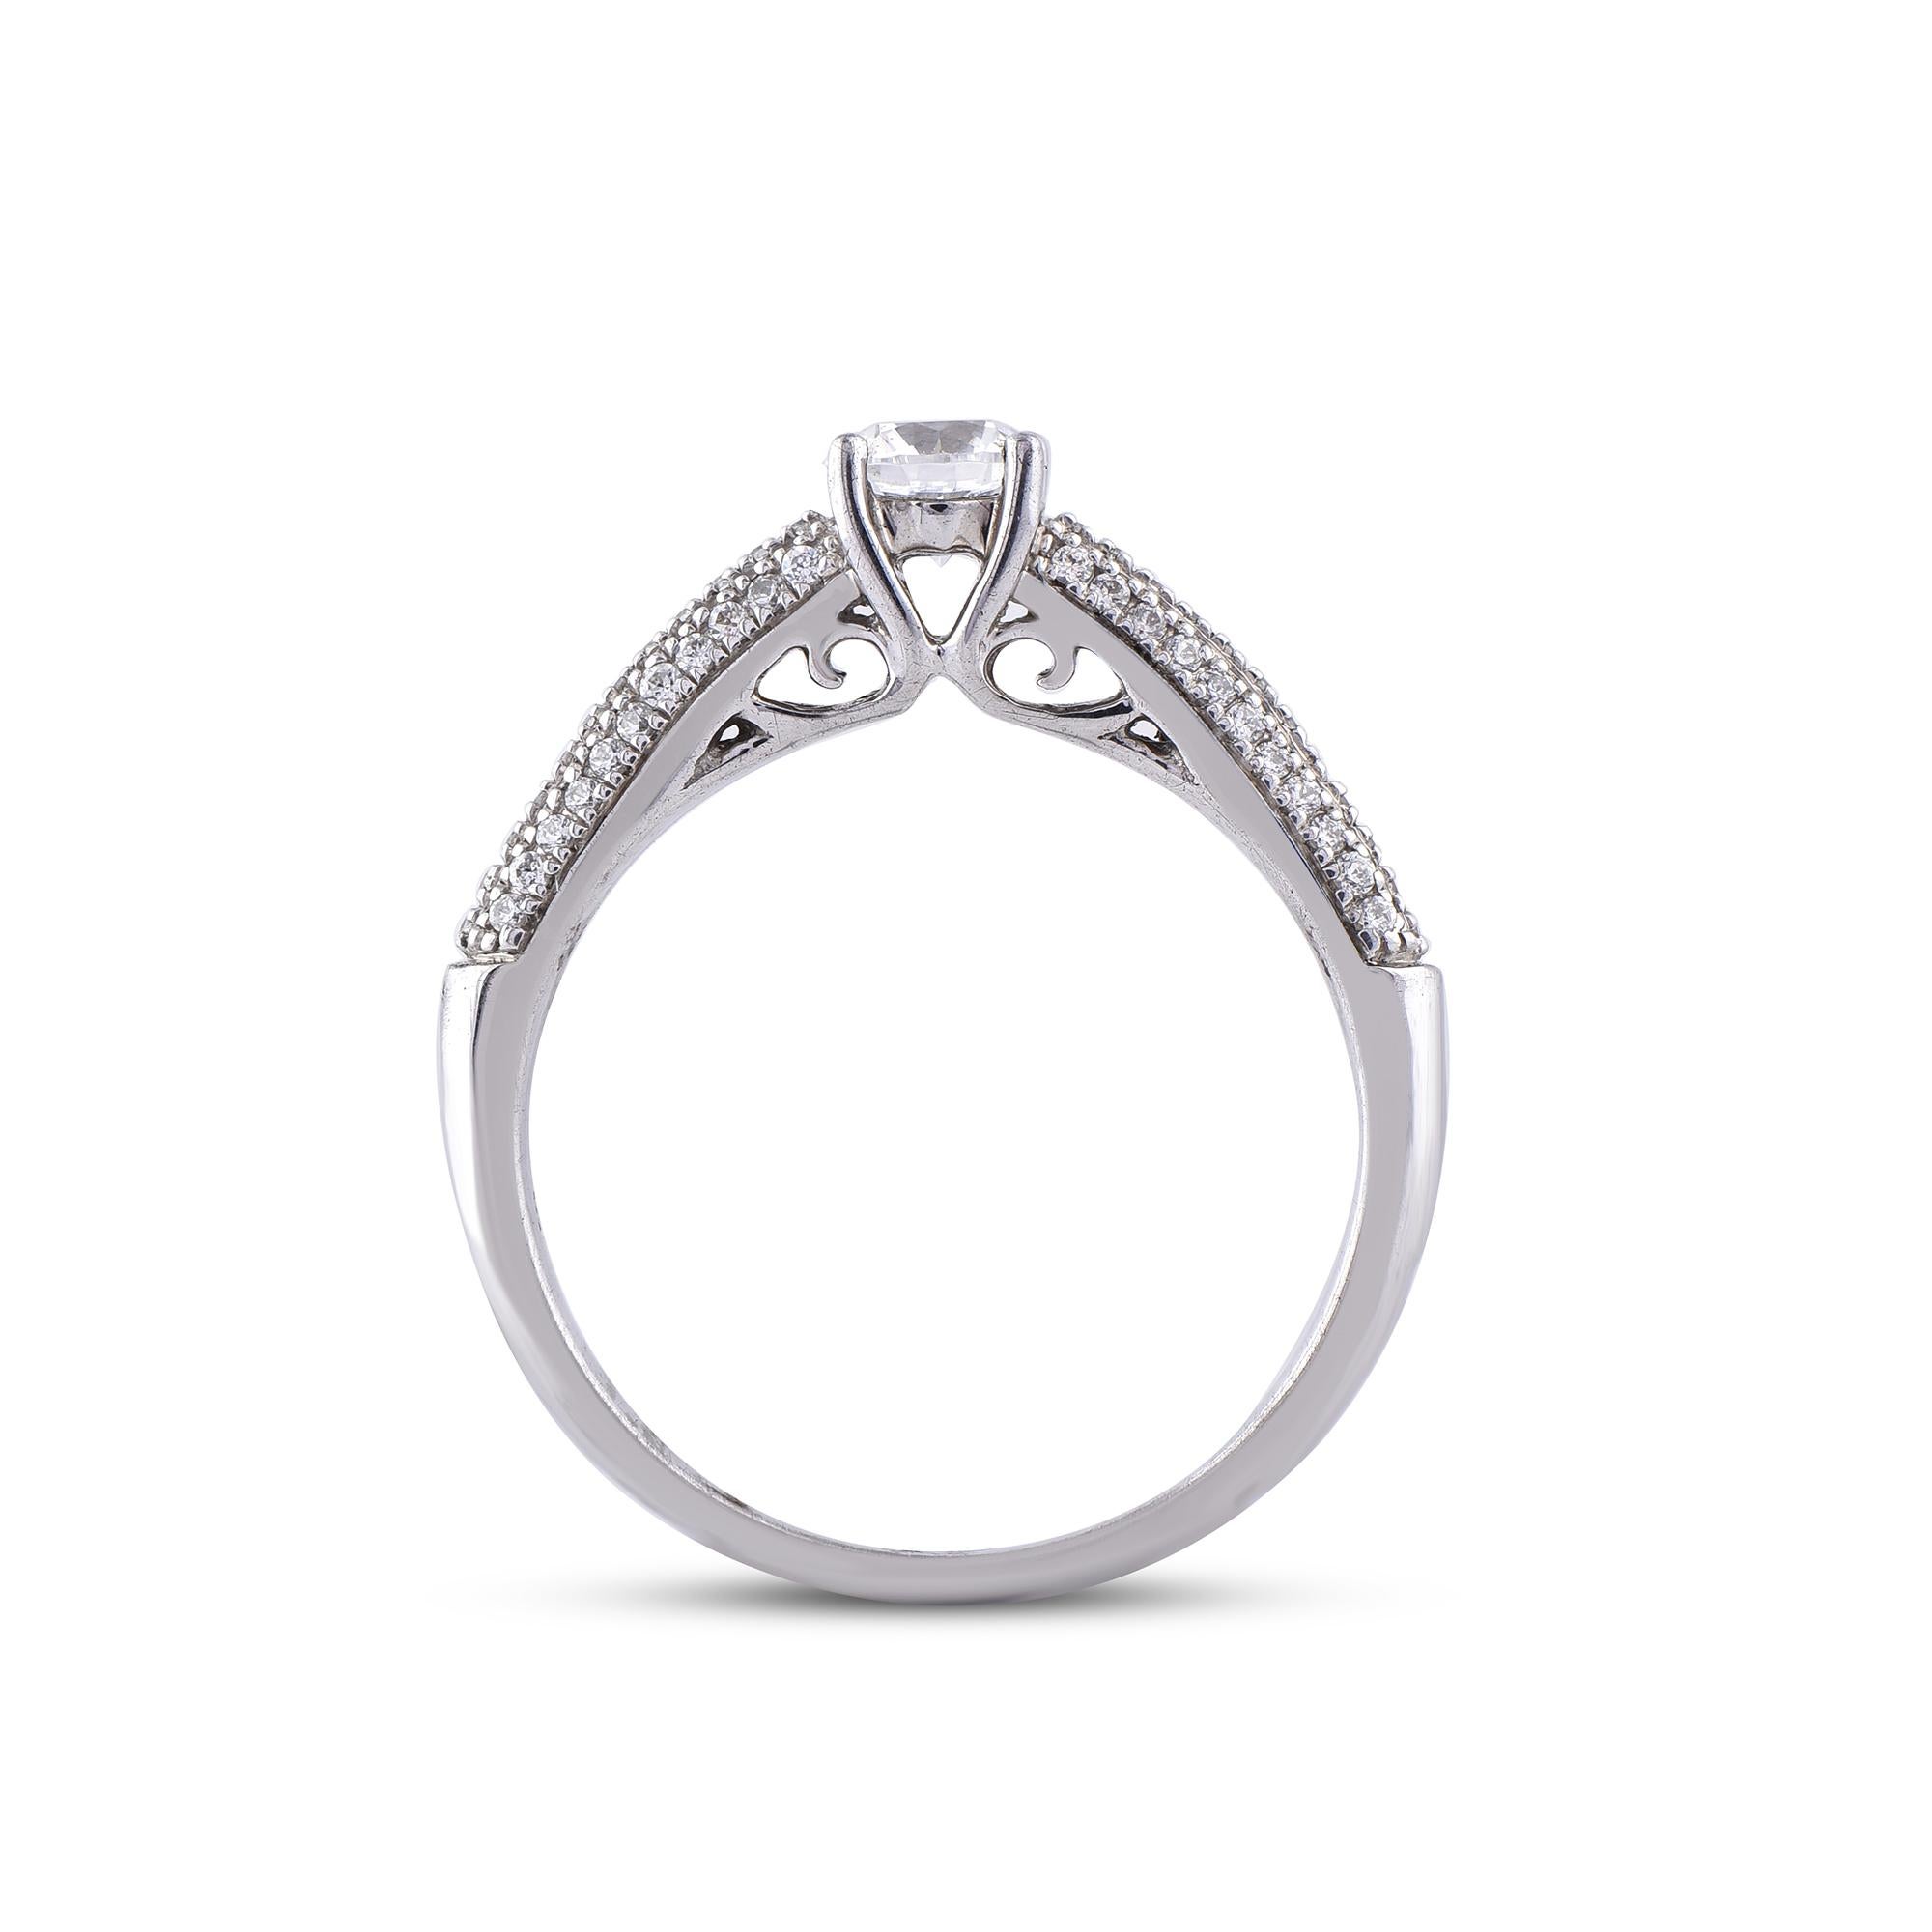 TJD 0.66 Carat 18 Karat White Gold 4 Prong Diamond Engagement Ring In New Condition For Sale In New York, NY